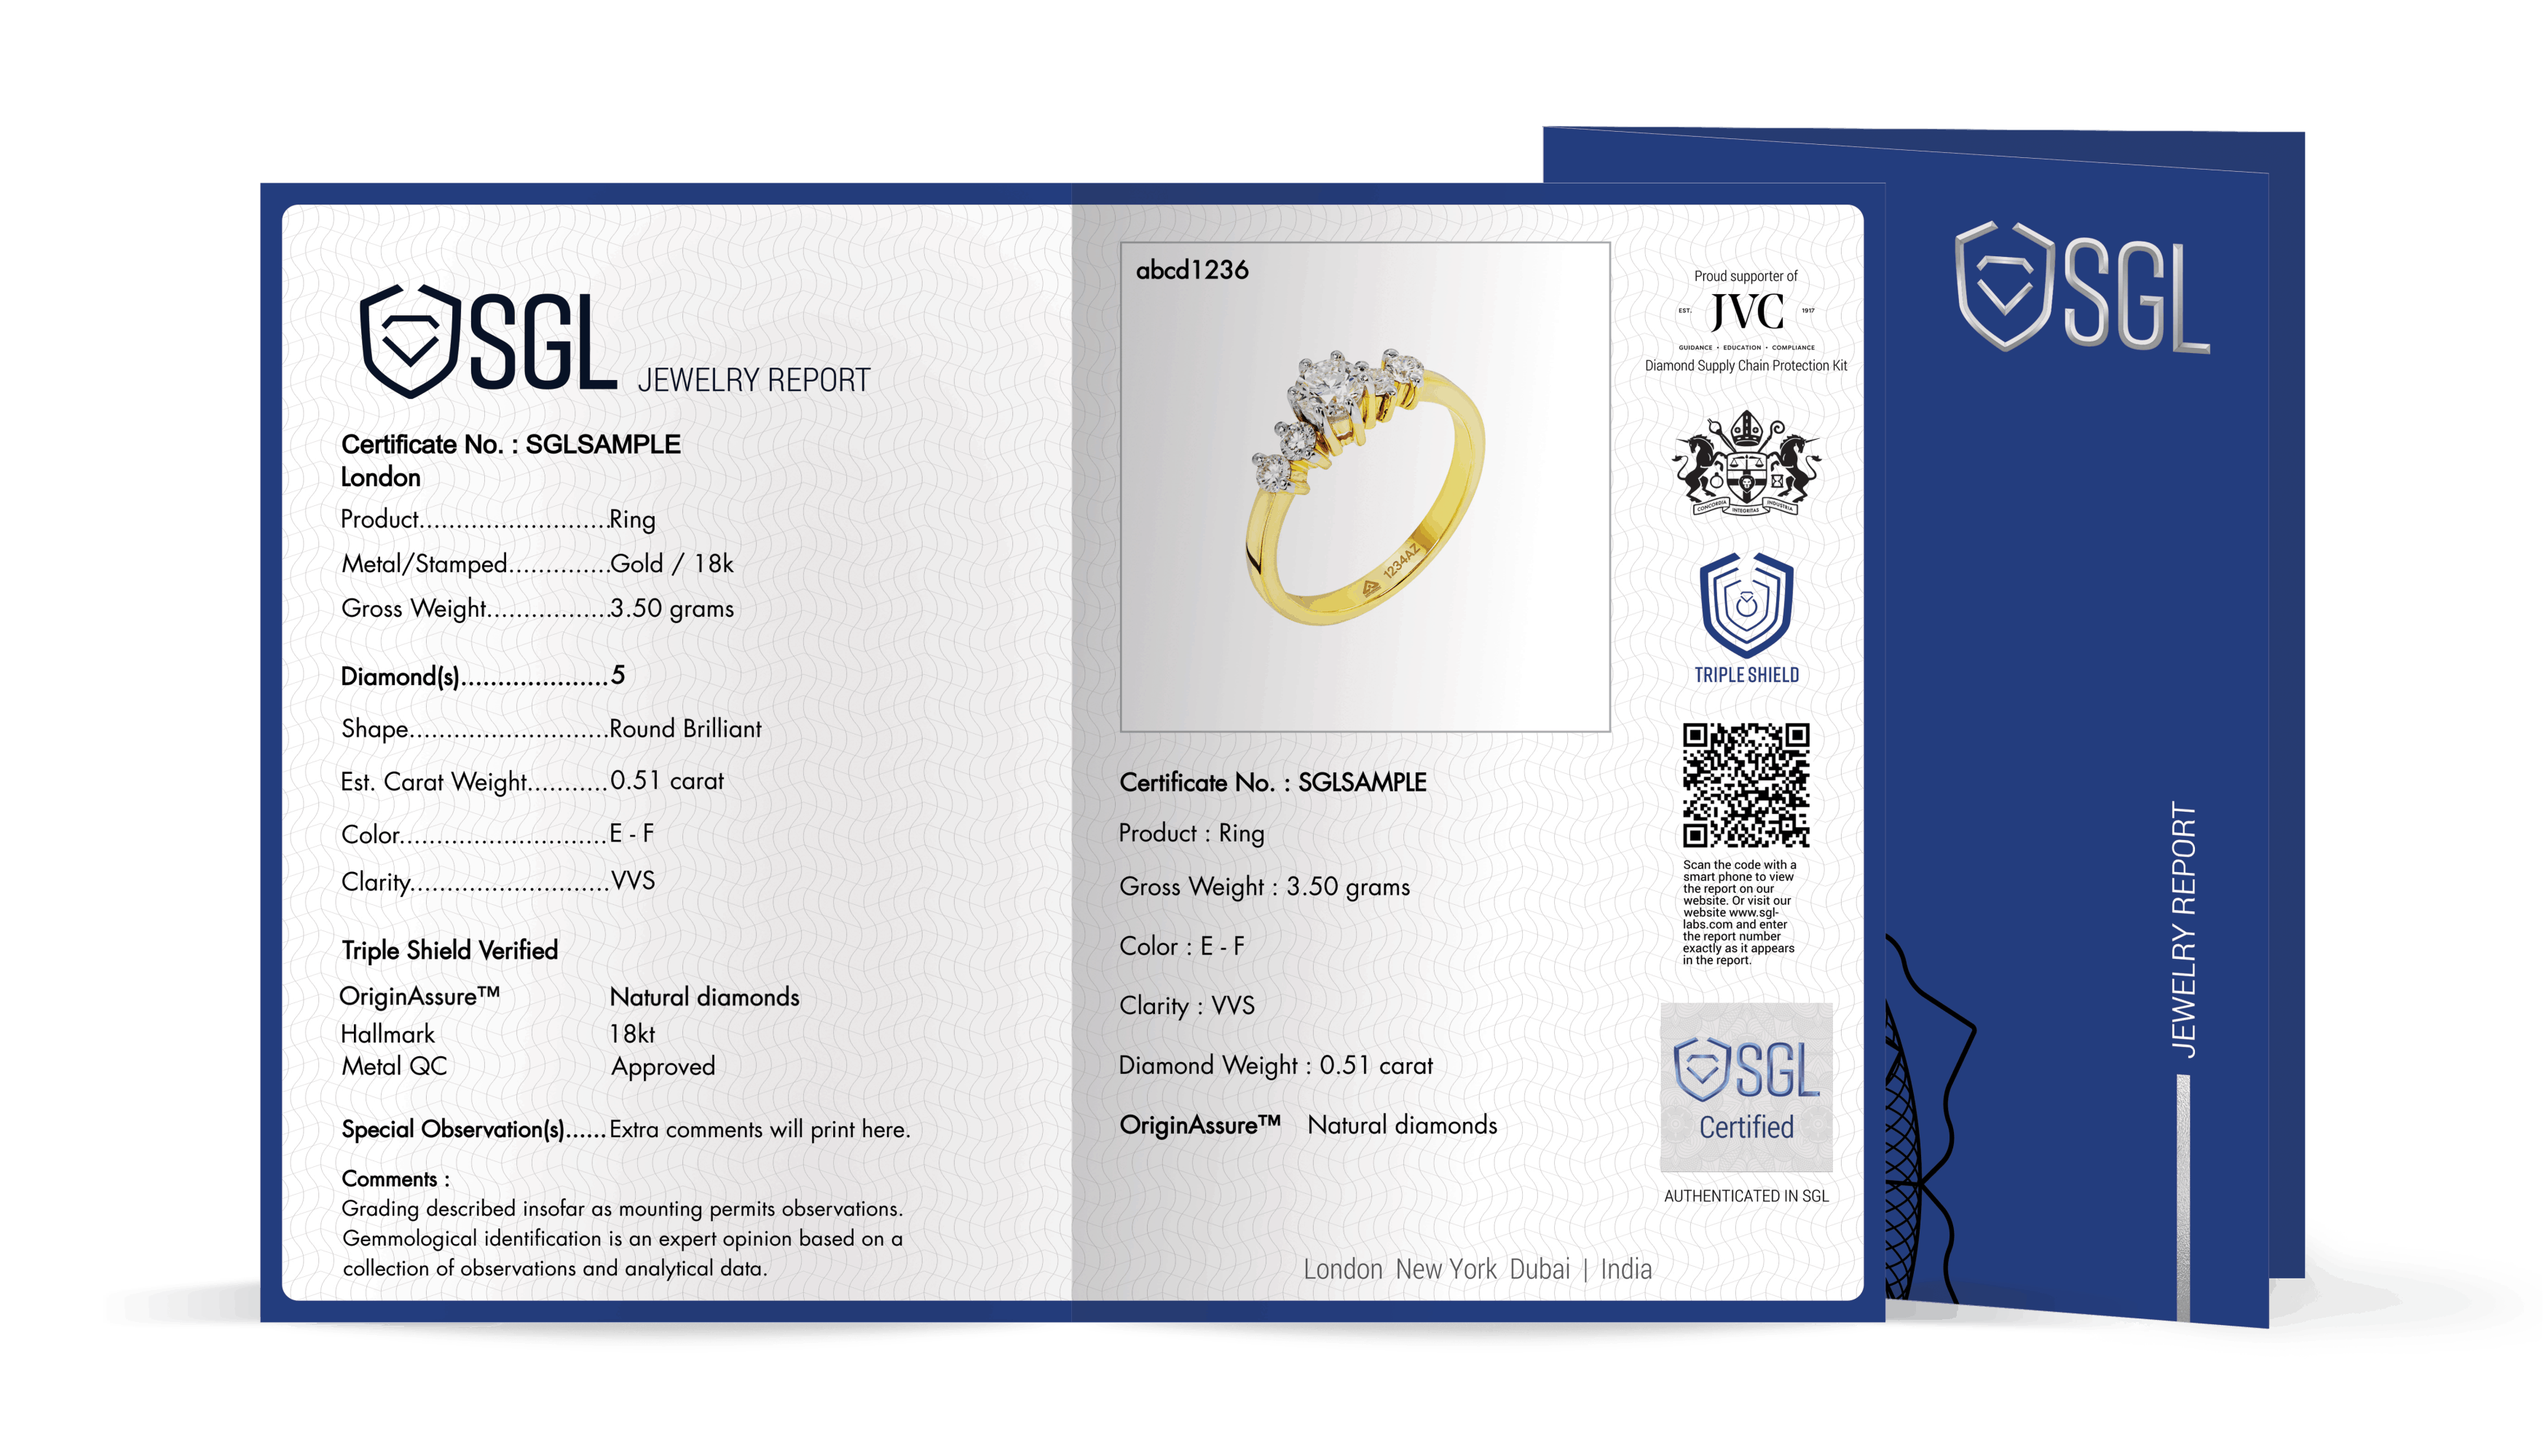 This is a sample jewellery report of a Triple shield certificate of a ring which mentions different attributes which are being checked by SGL Labs.